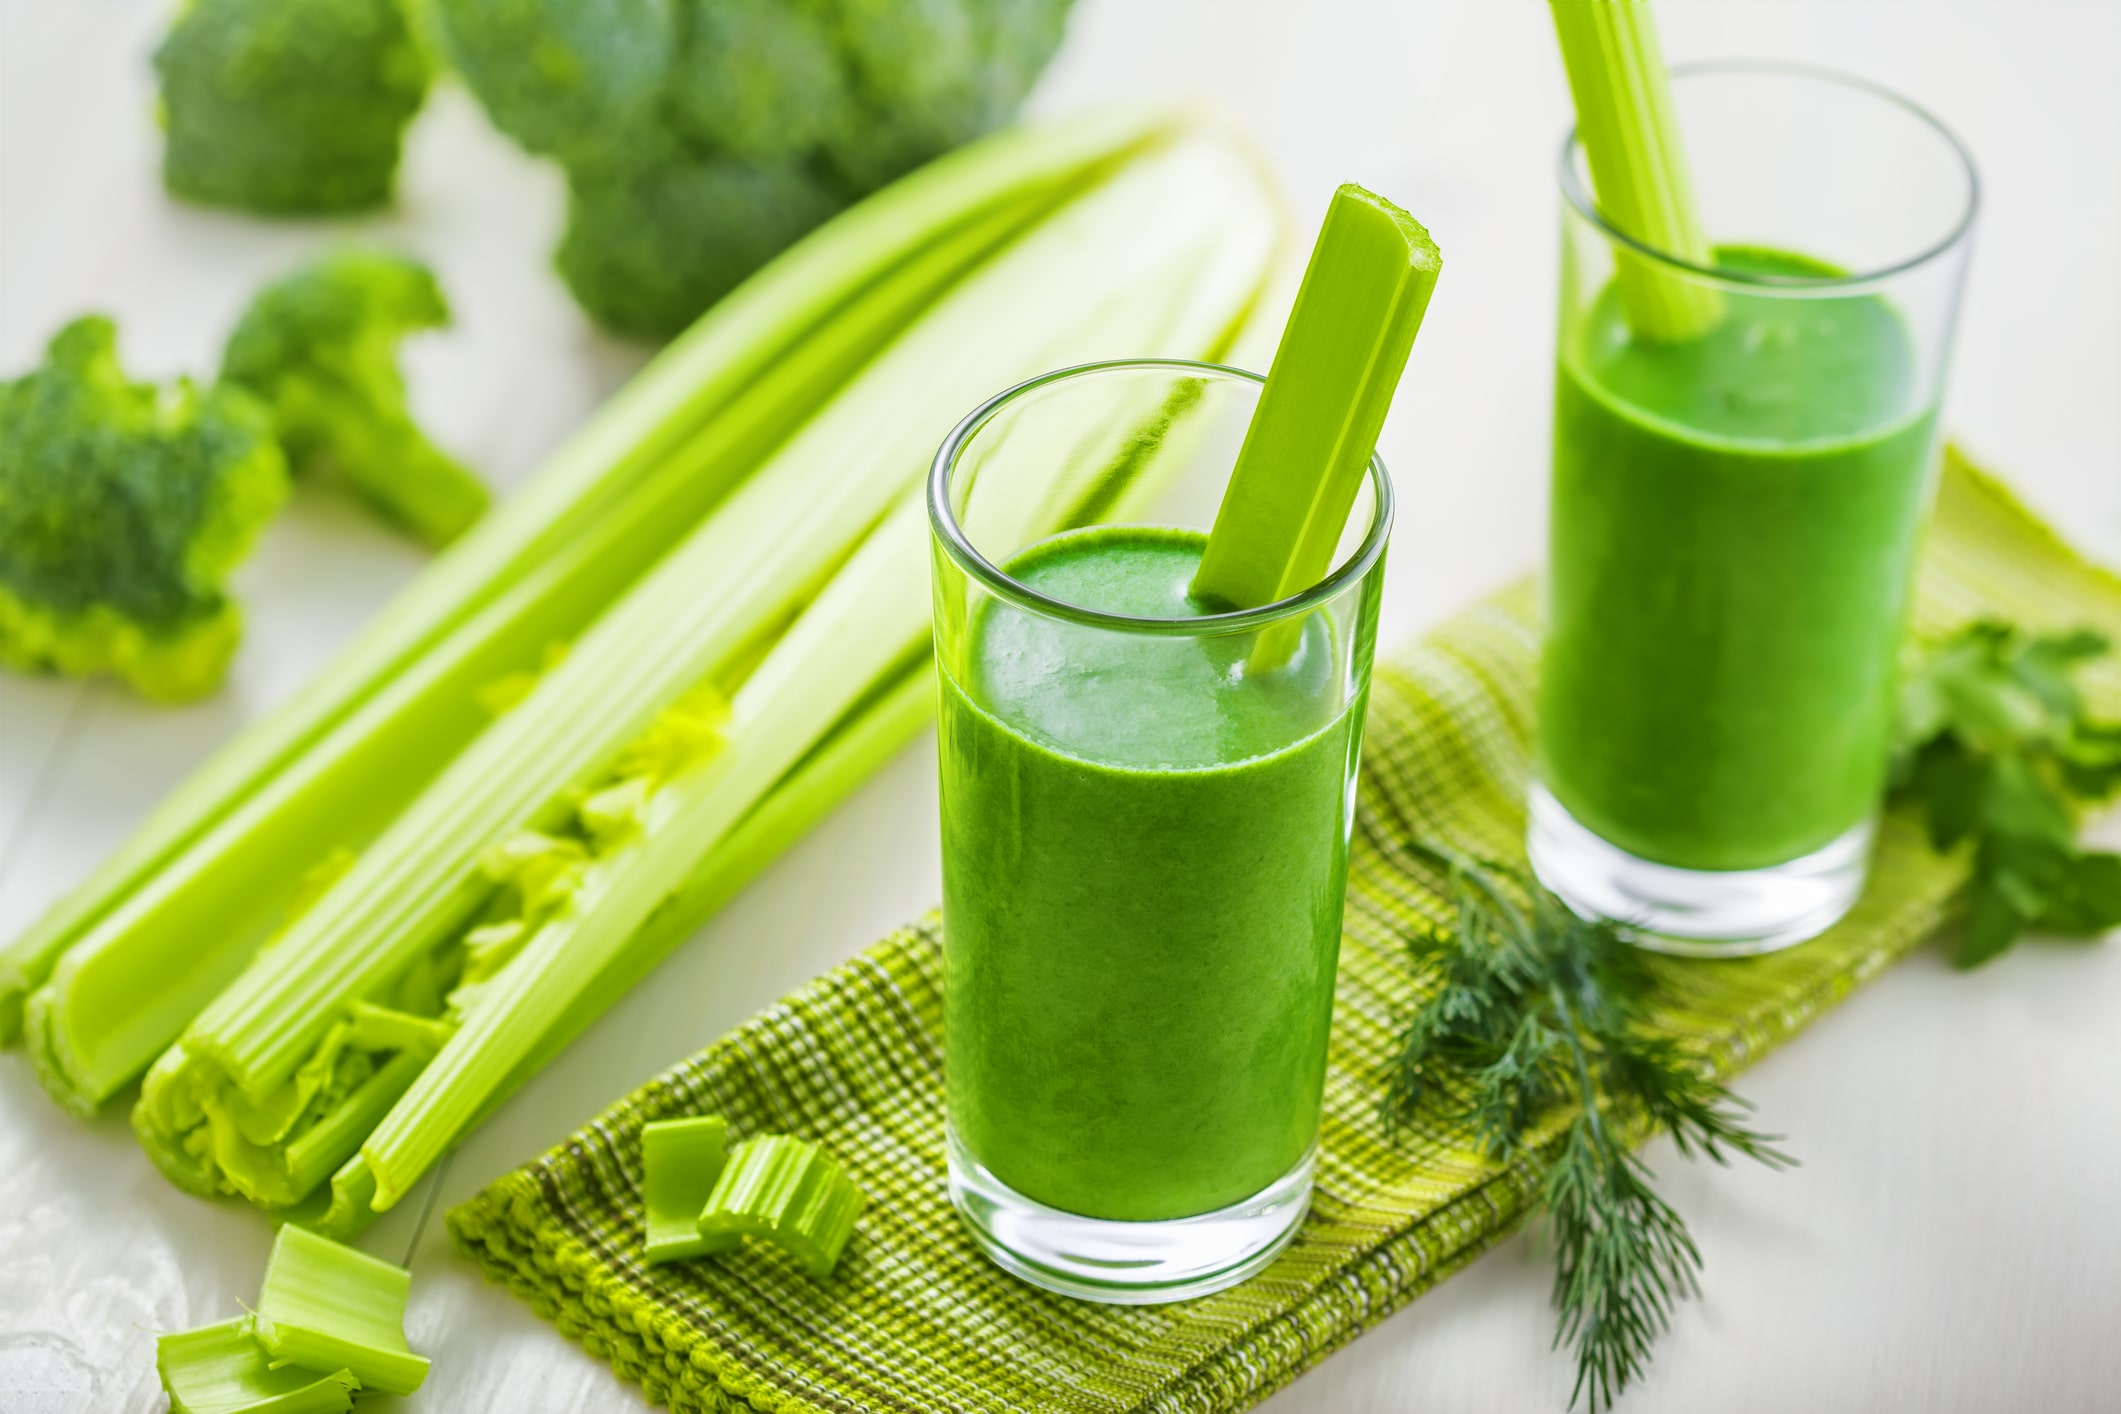 What’s the Deal with Celery Juice?